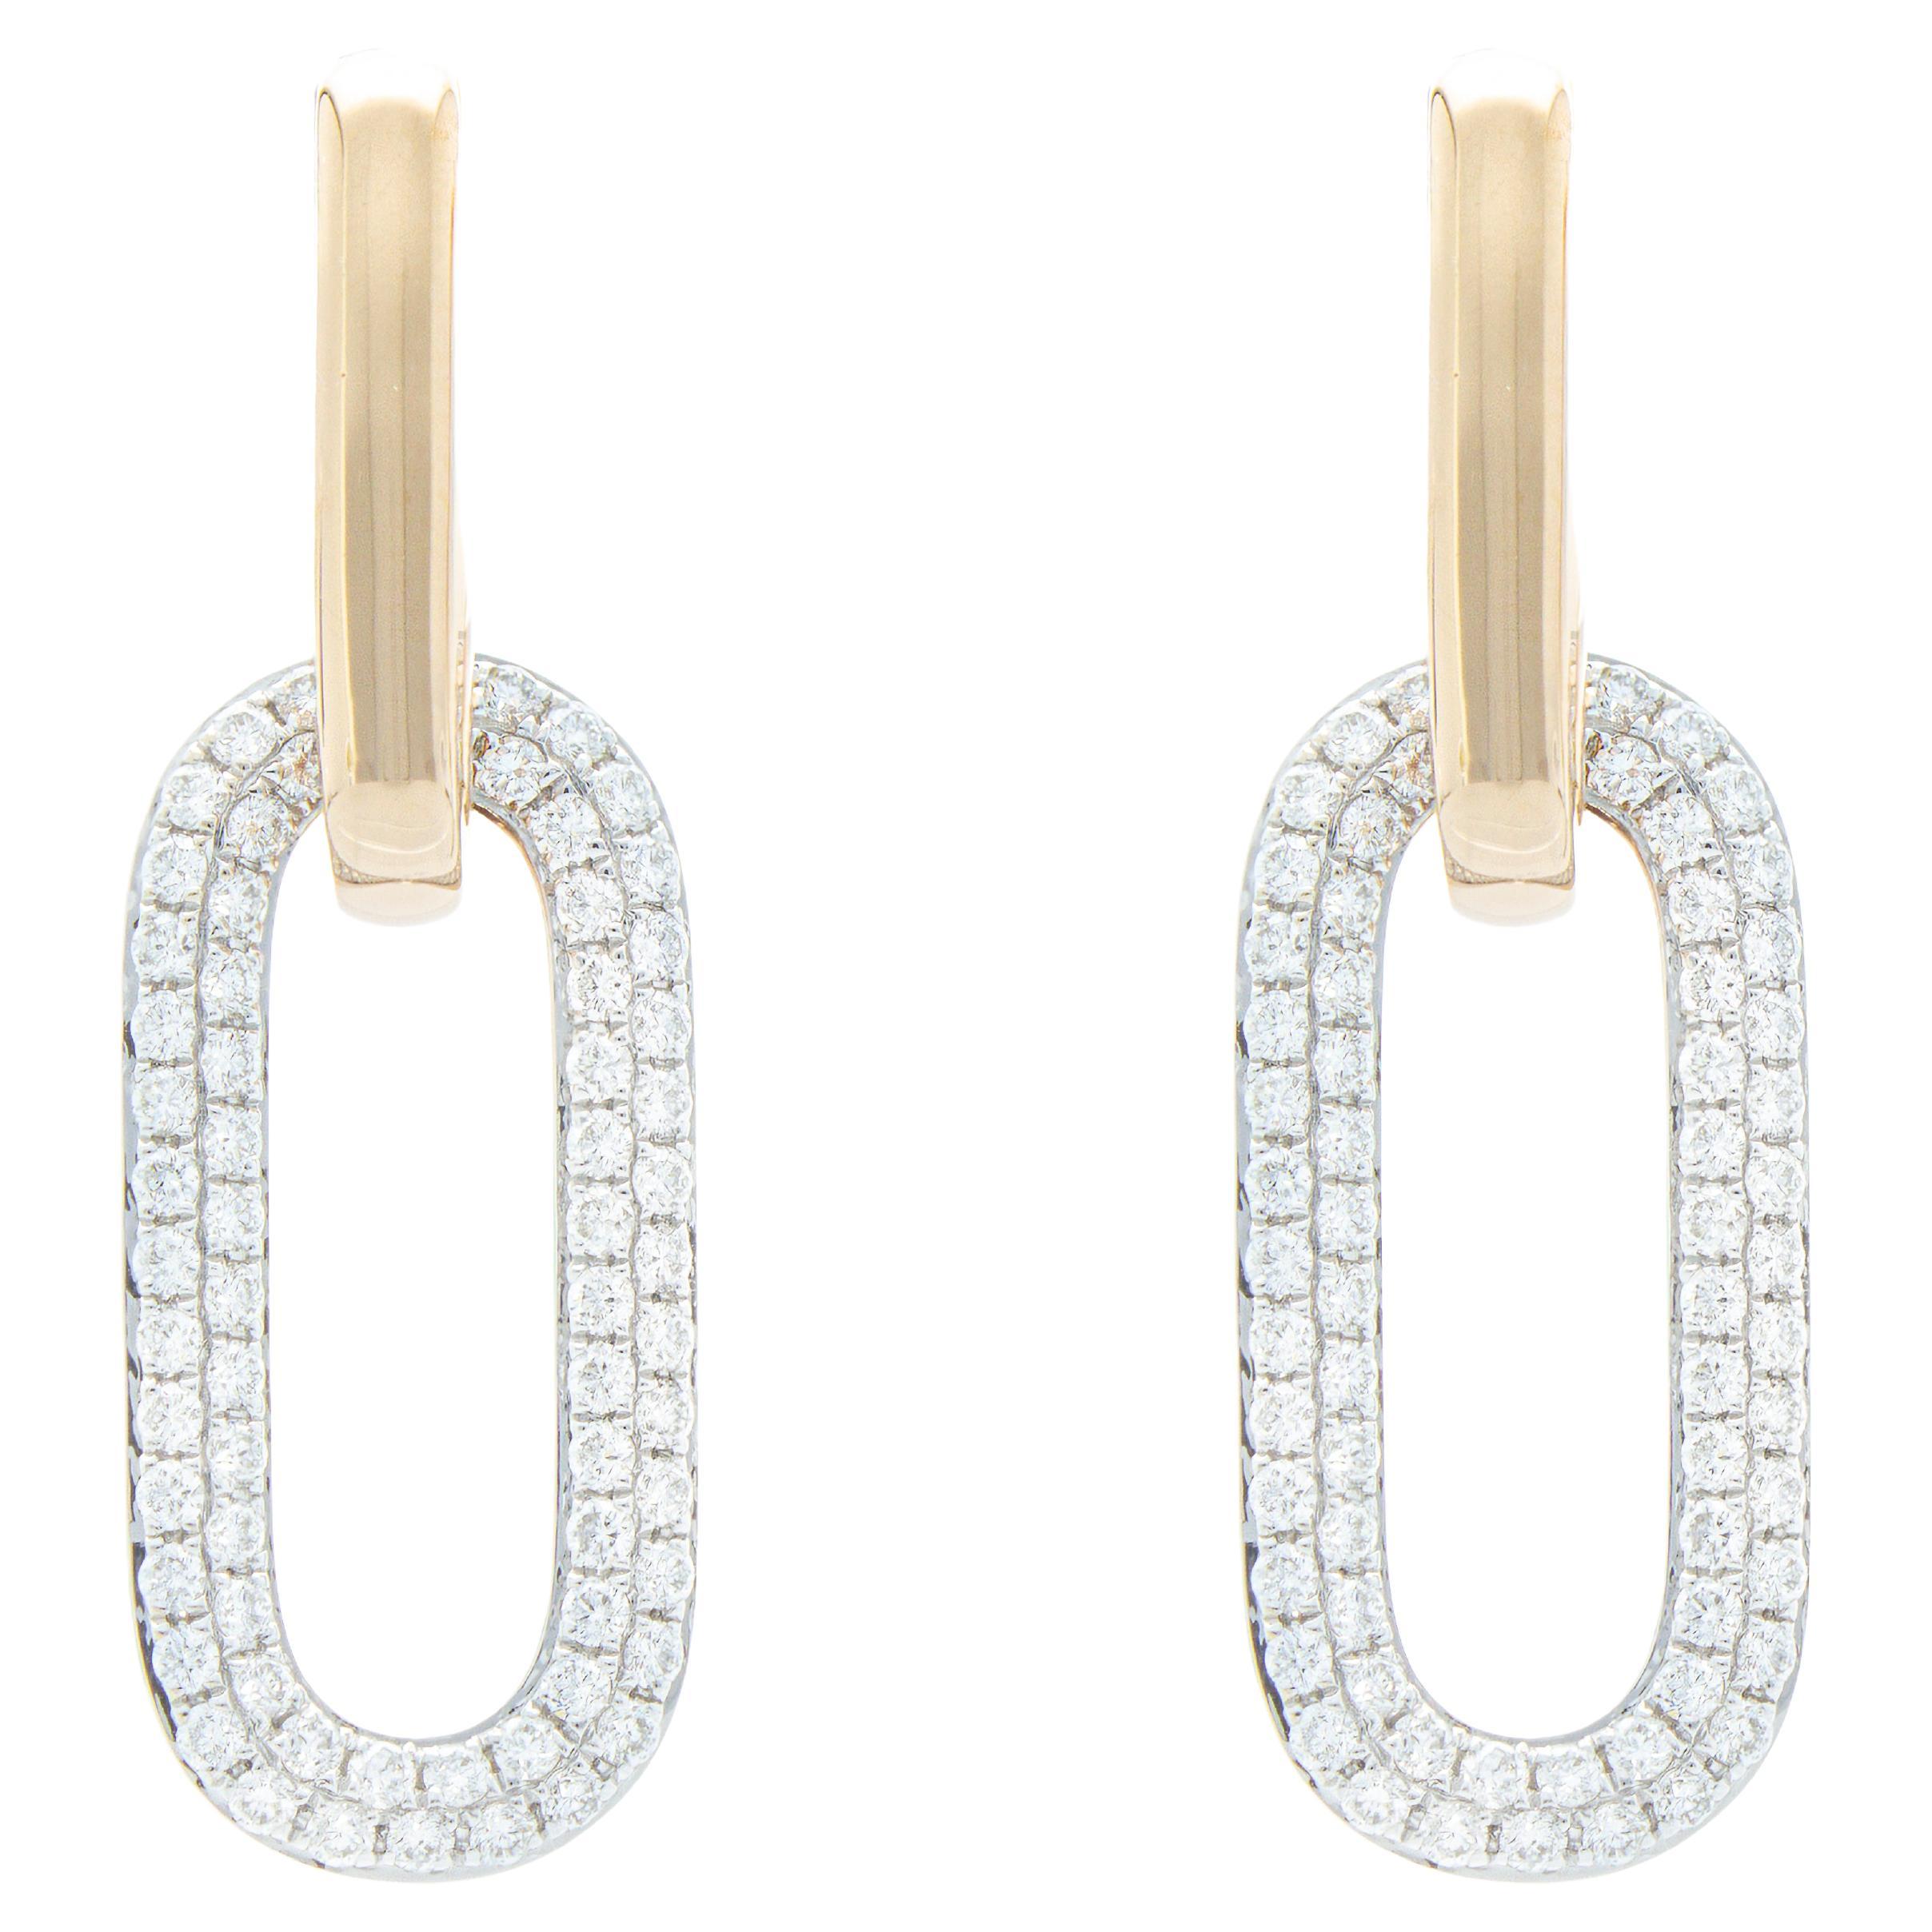 Pendant Earrings with 1.11 ct of Diamonds in 18 Kt Gold